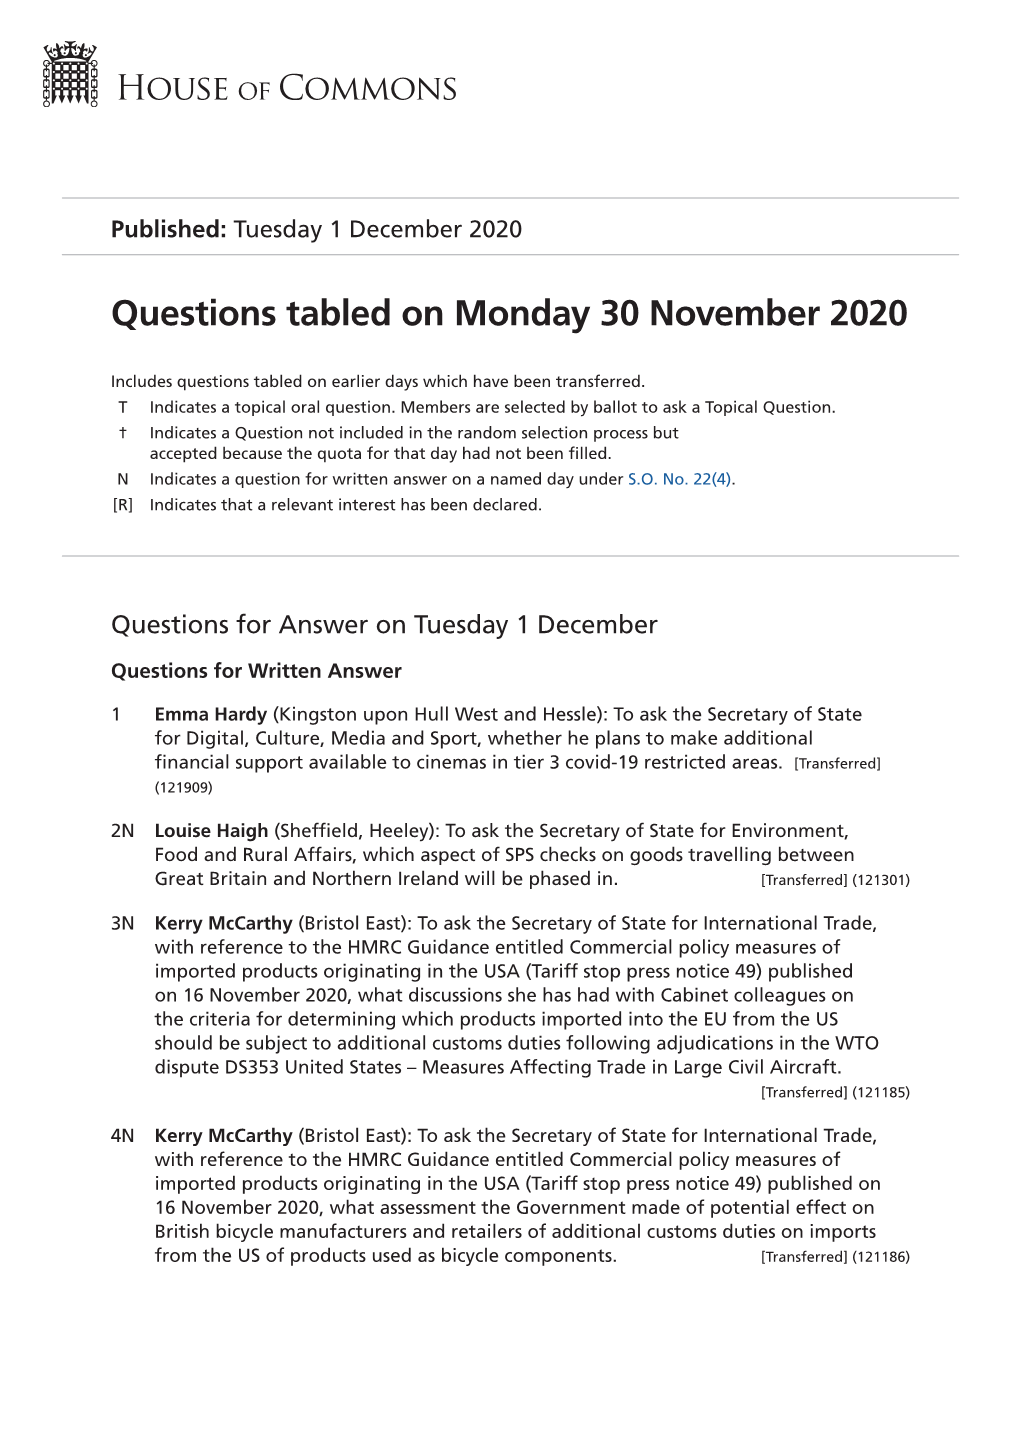 Questions Tabled on Monday 30 November 2020